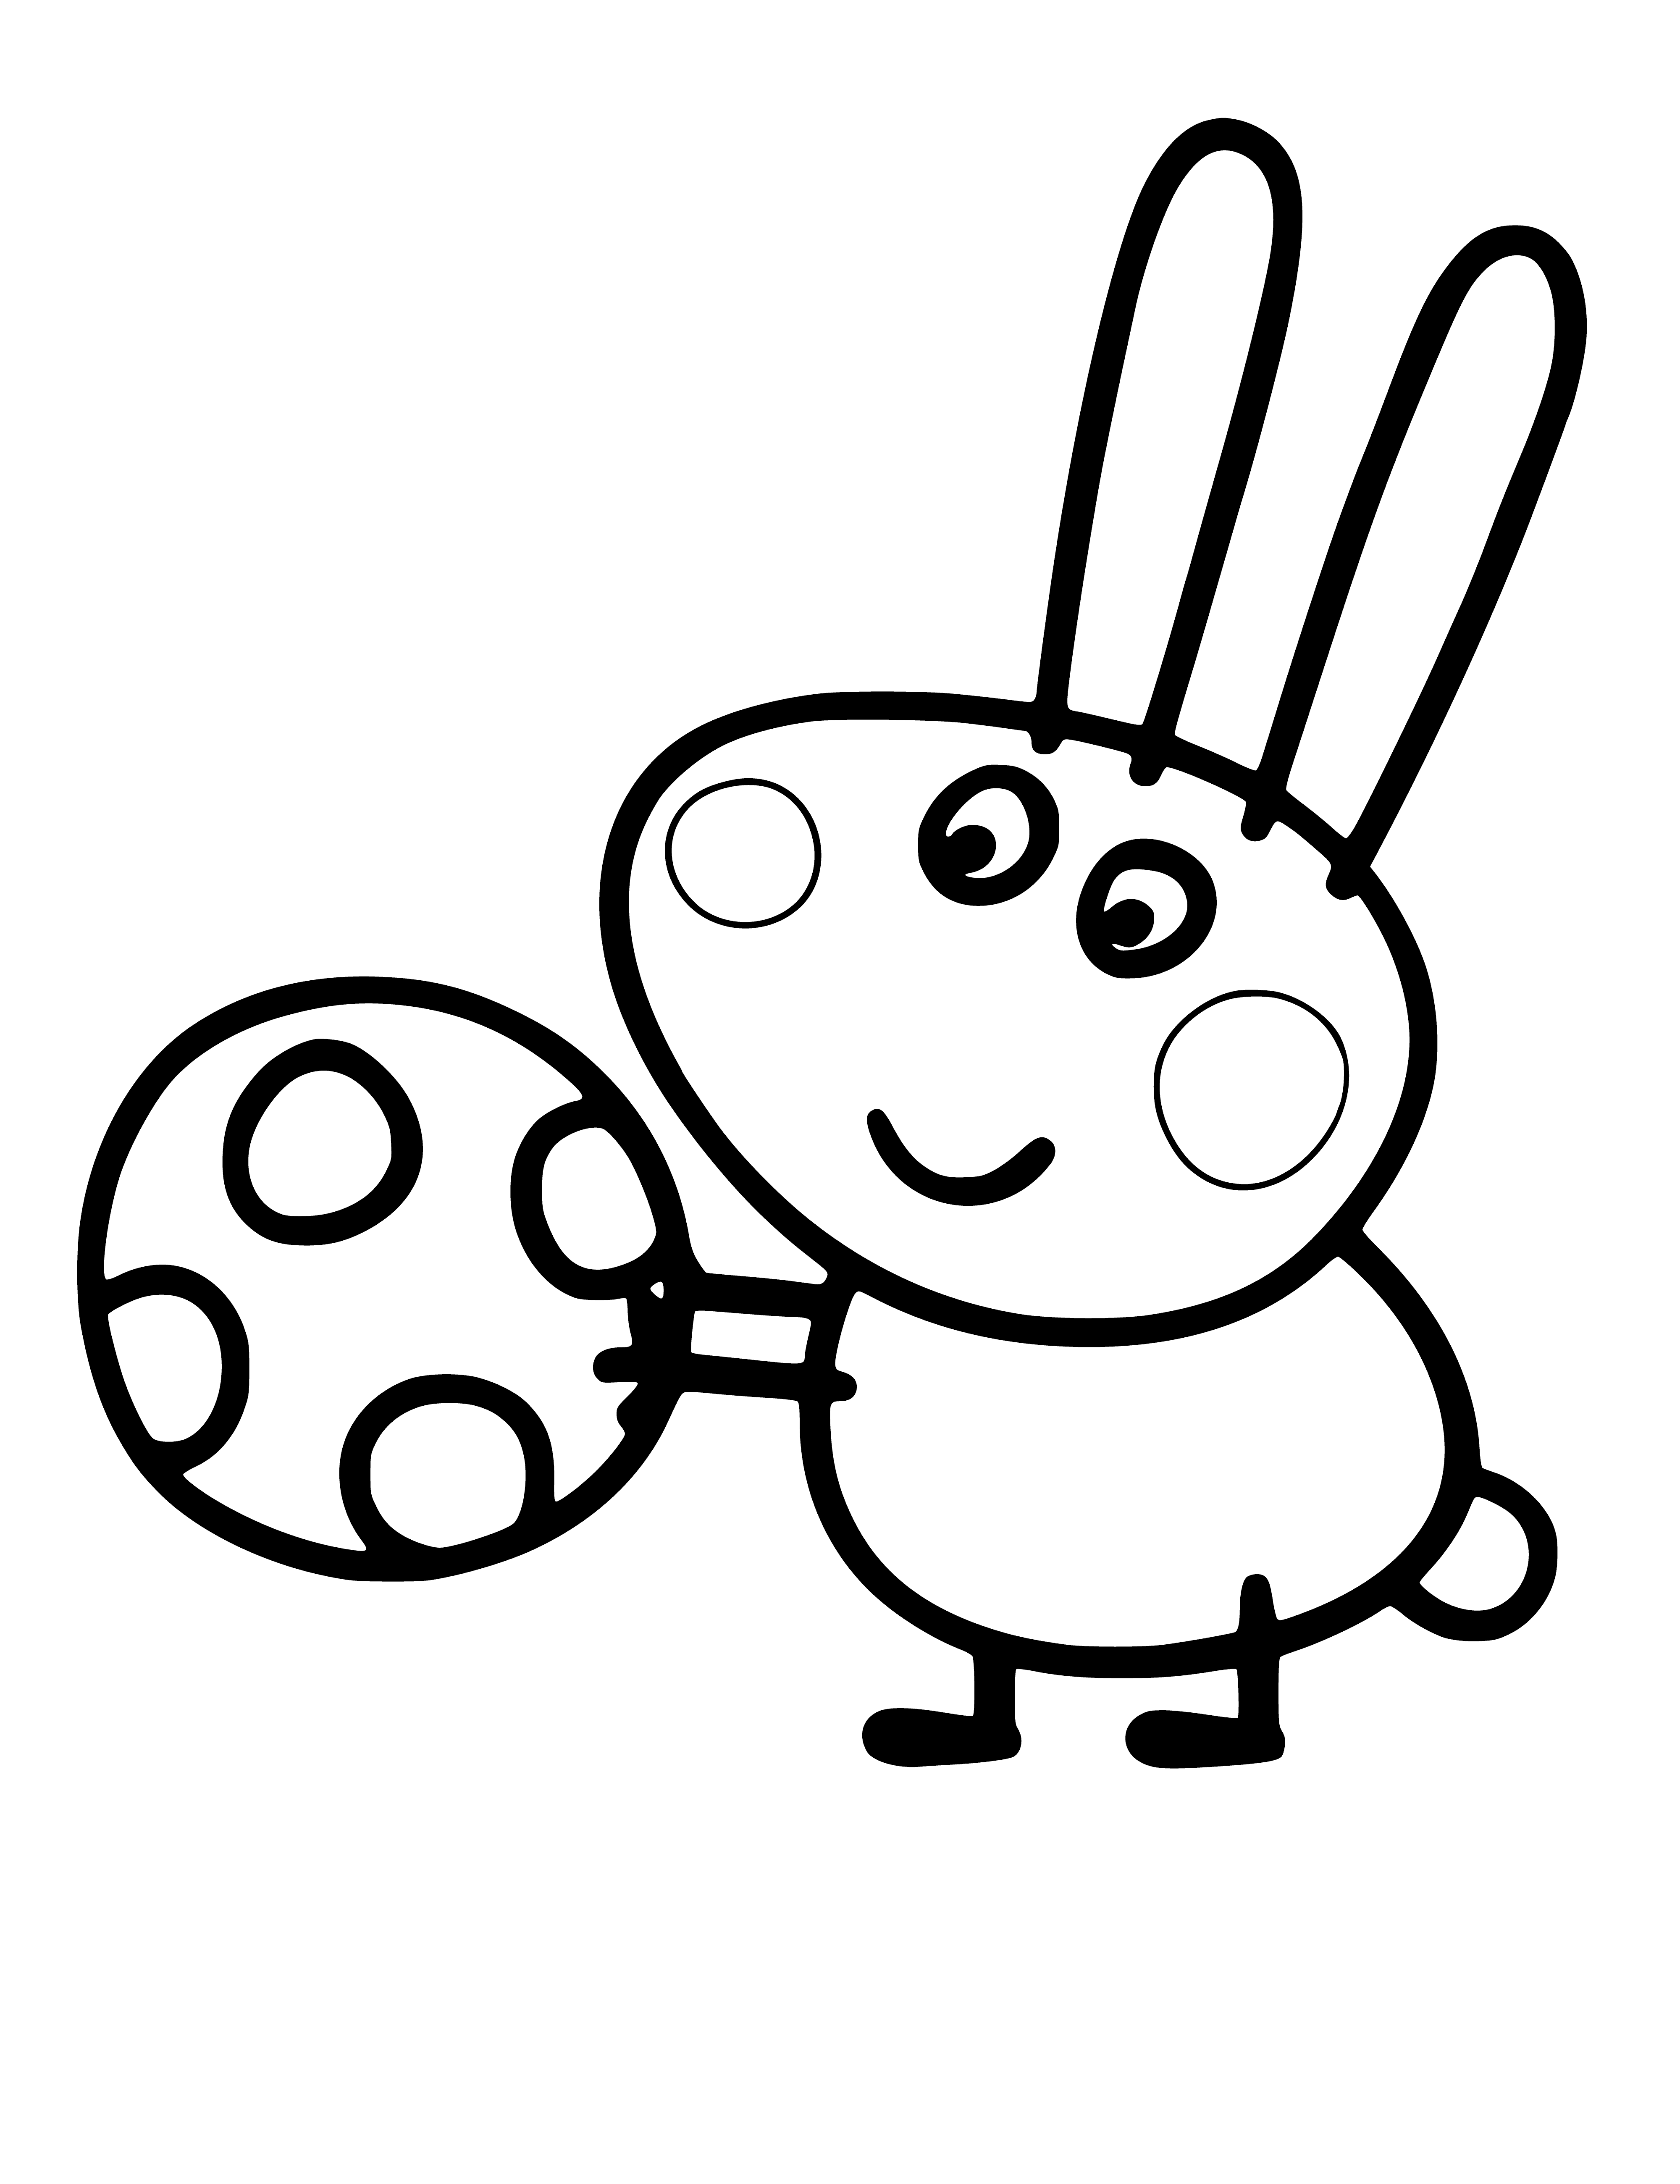 Rabbit Richard with a ball coloring page